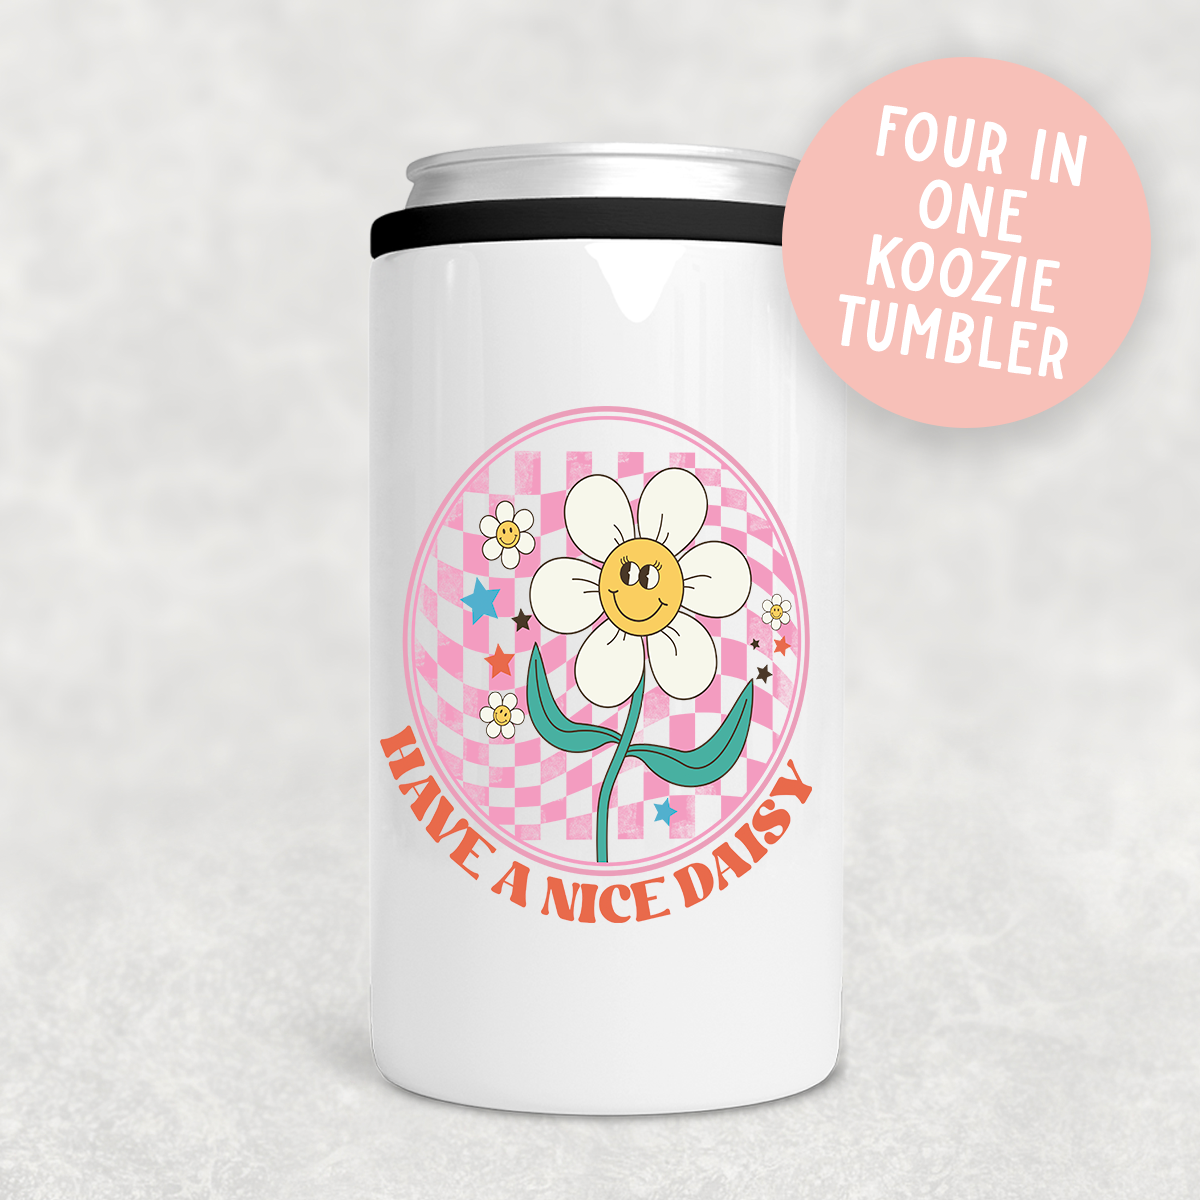 Have a Nice Daisy 4 in 1 Tumbler